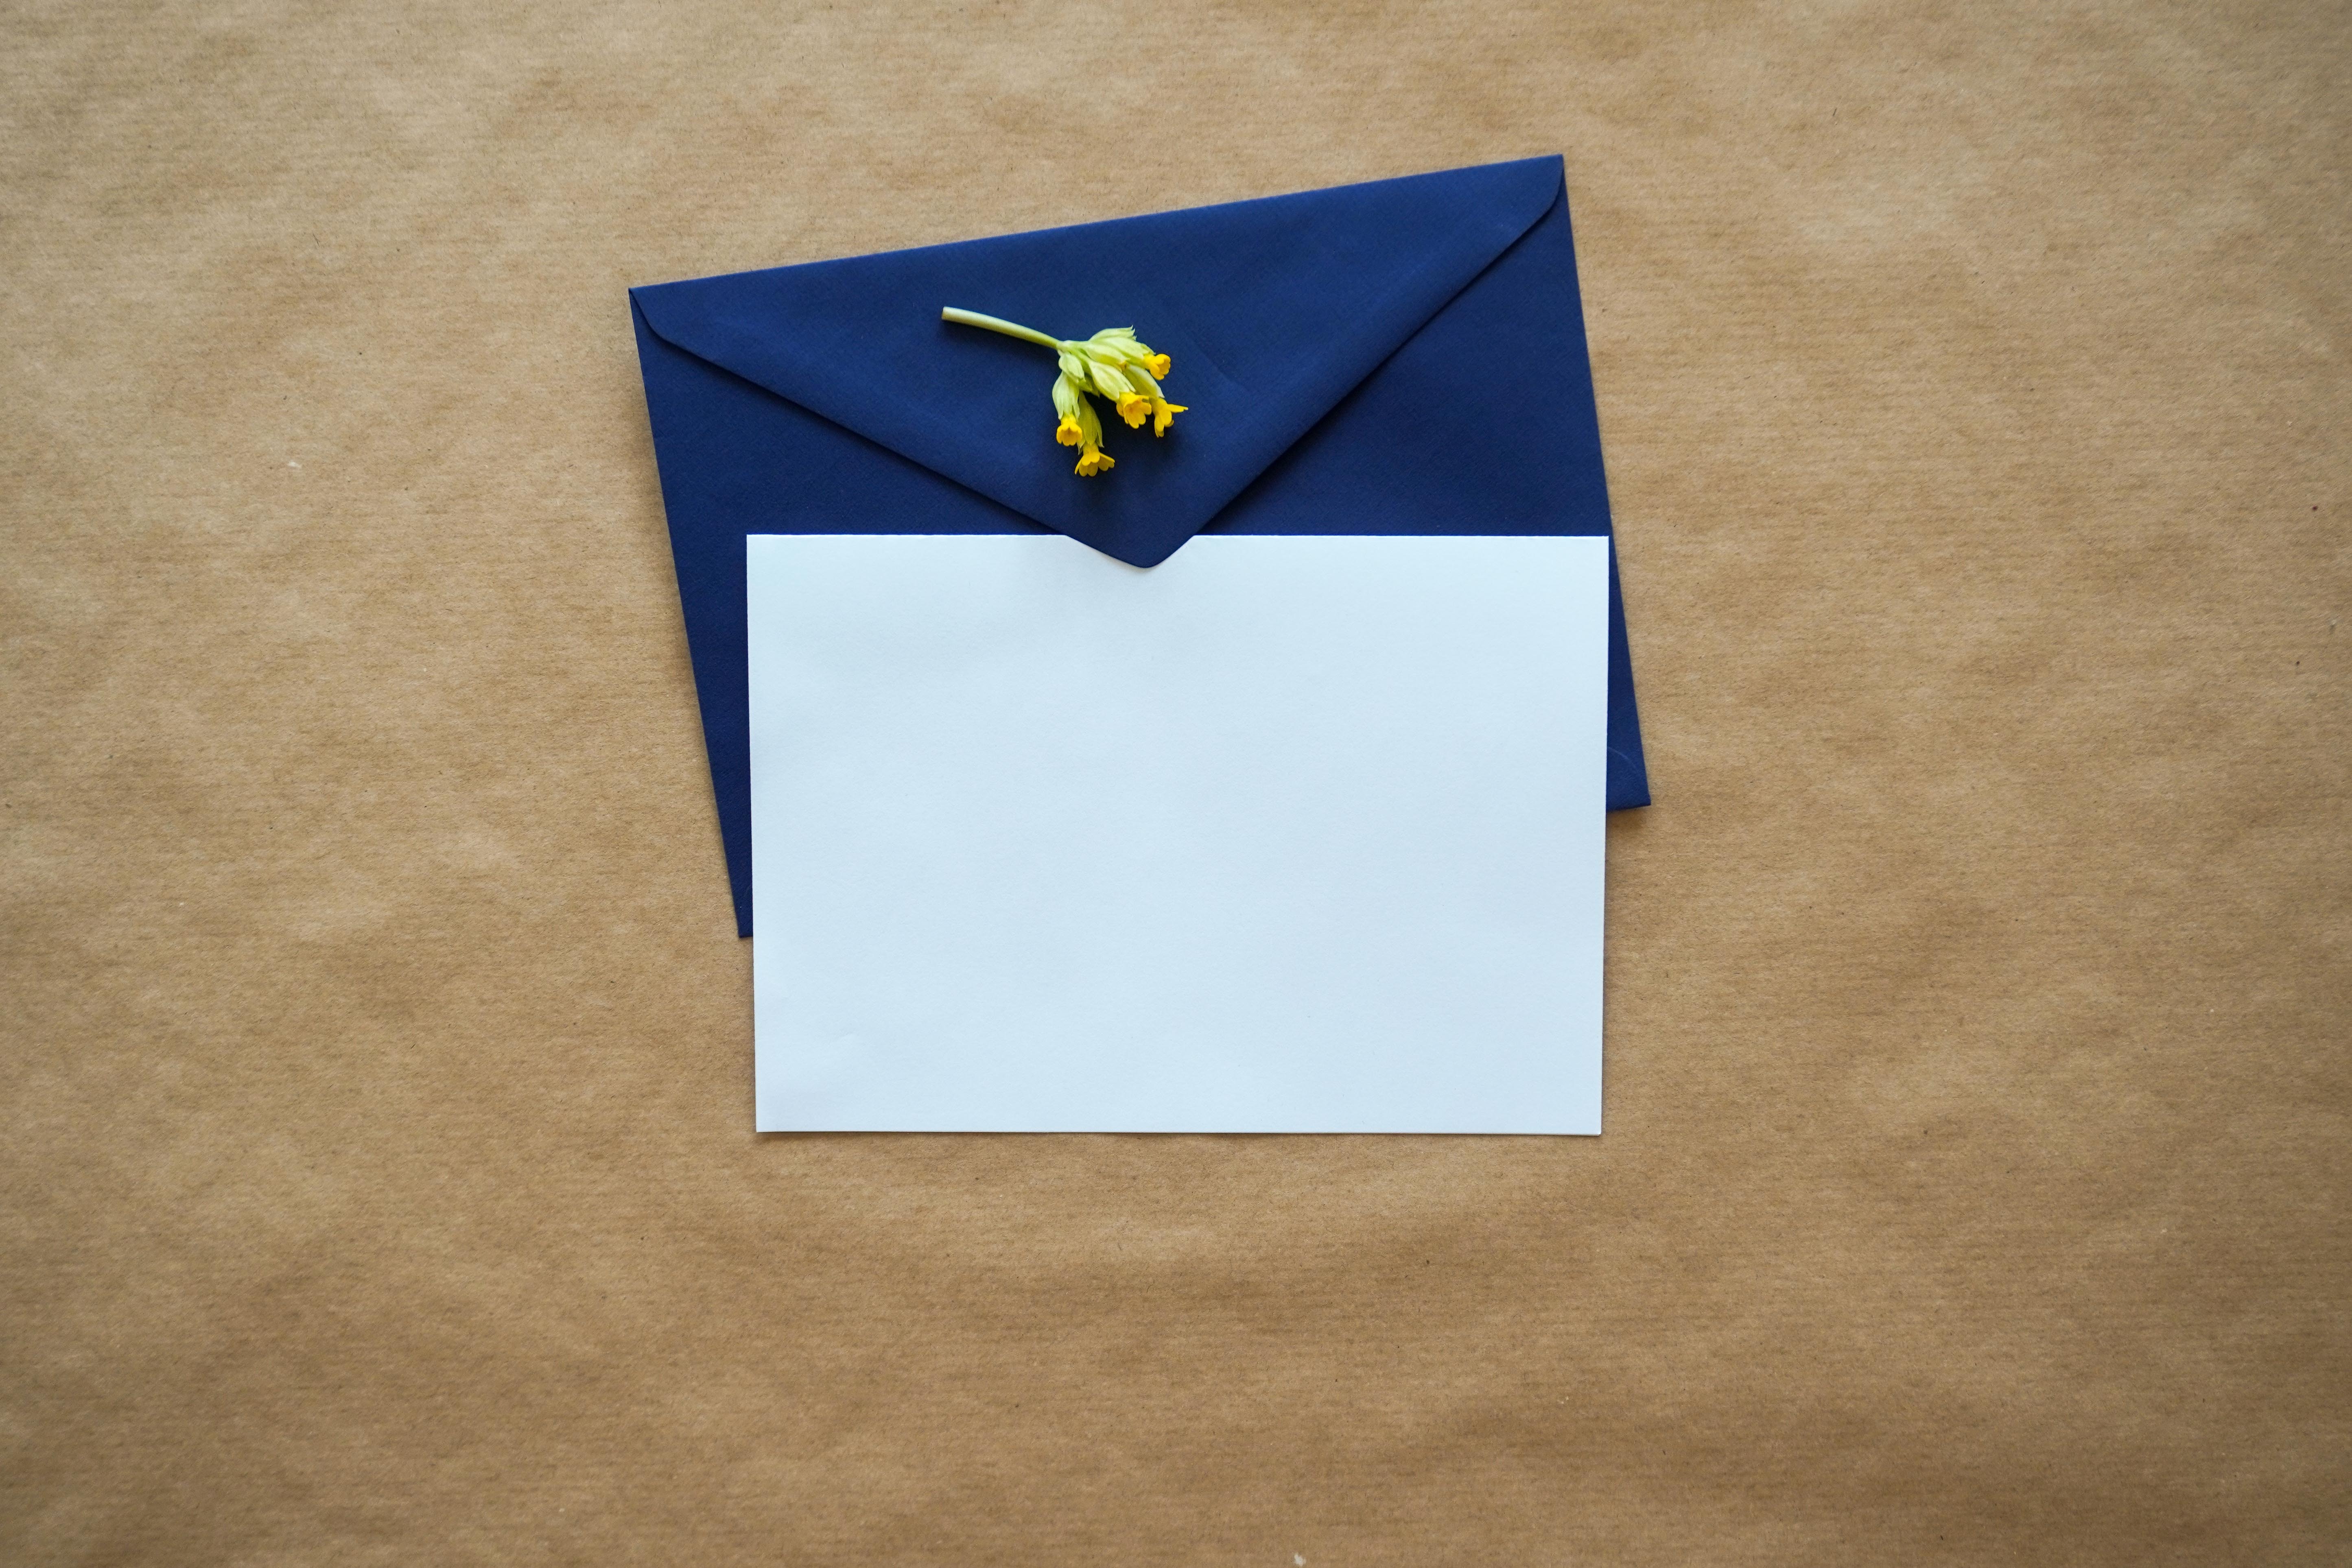 The letter made Gabriel cry. | Source: Unsplash